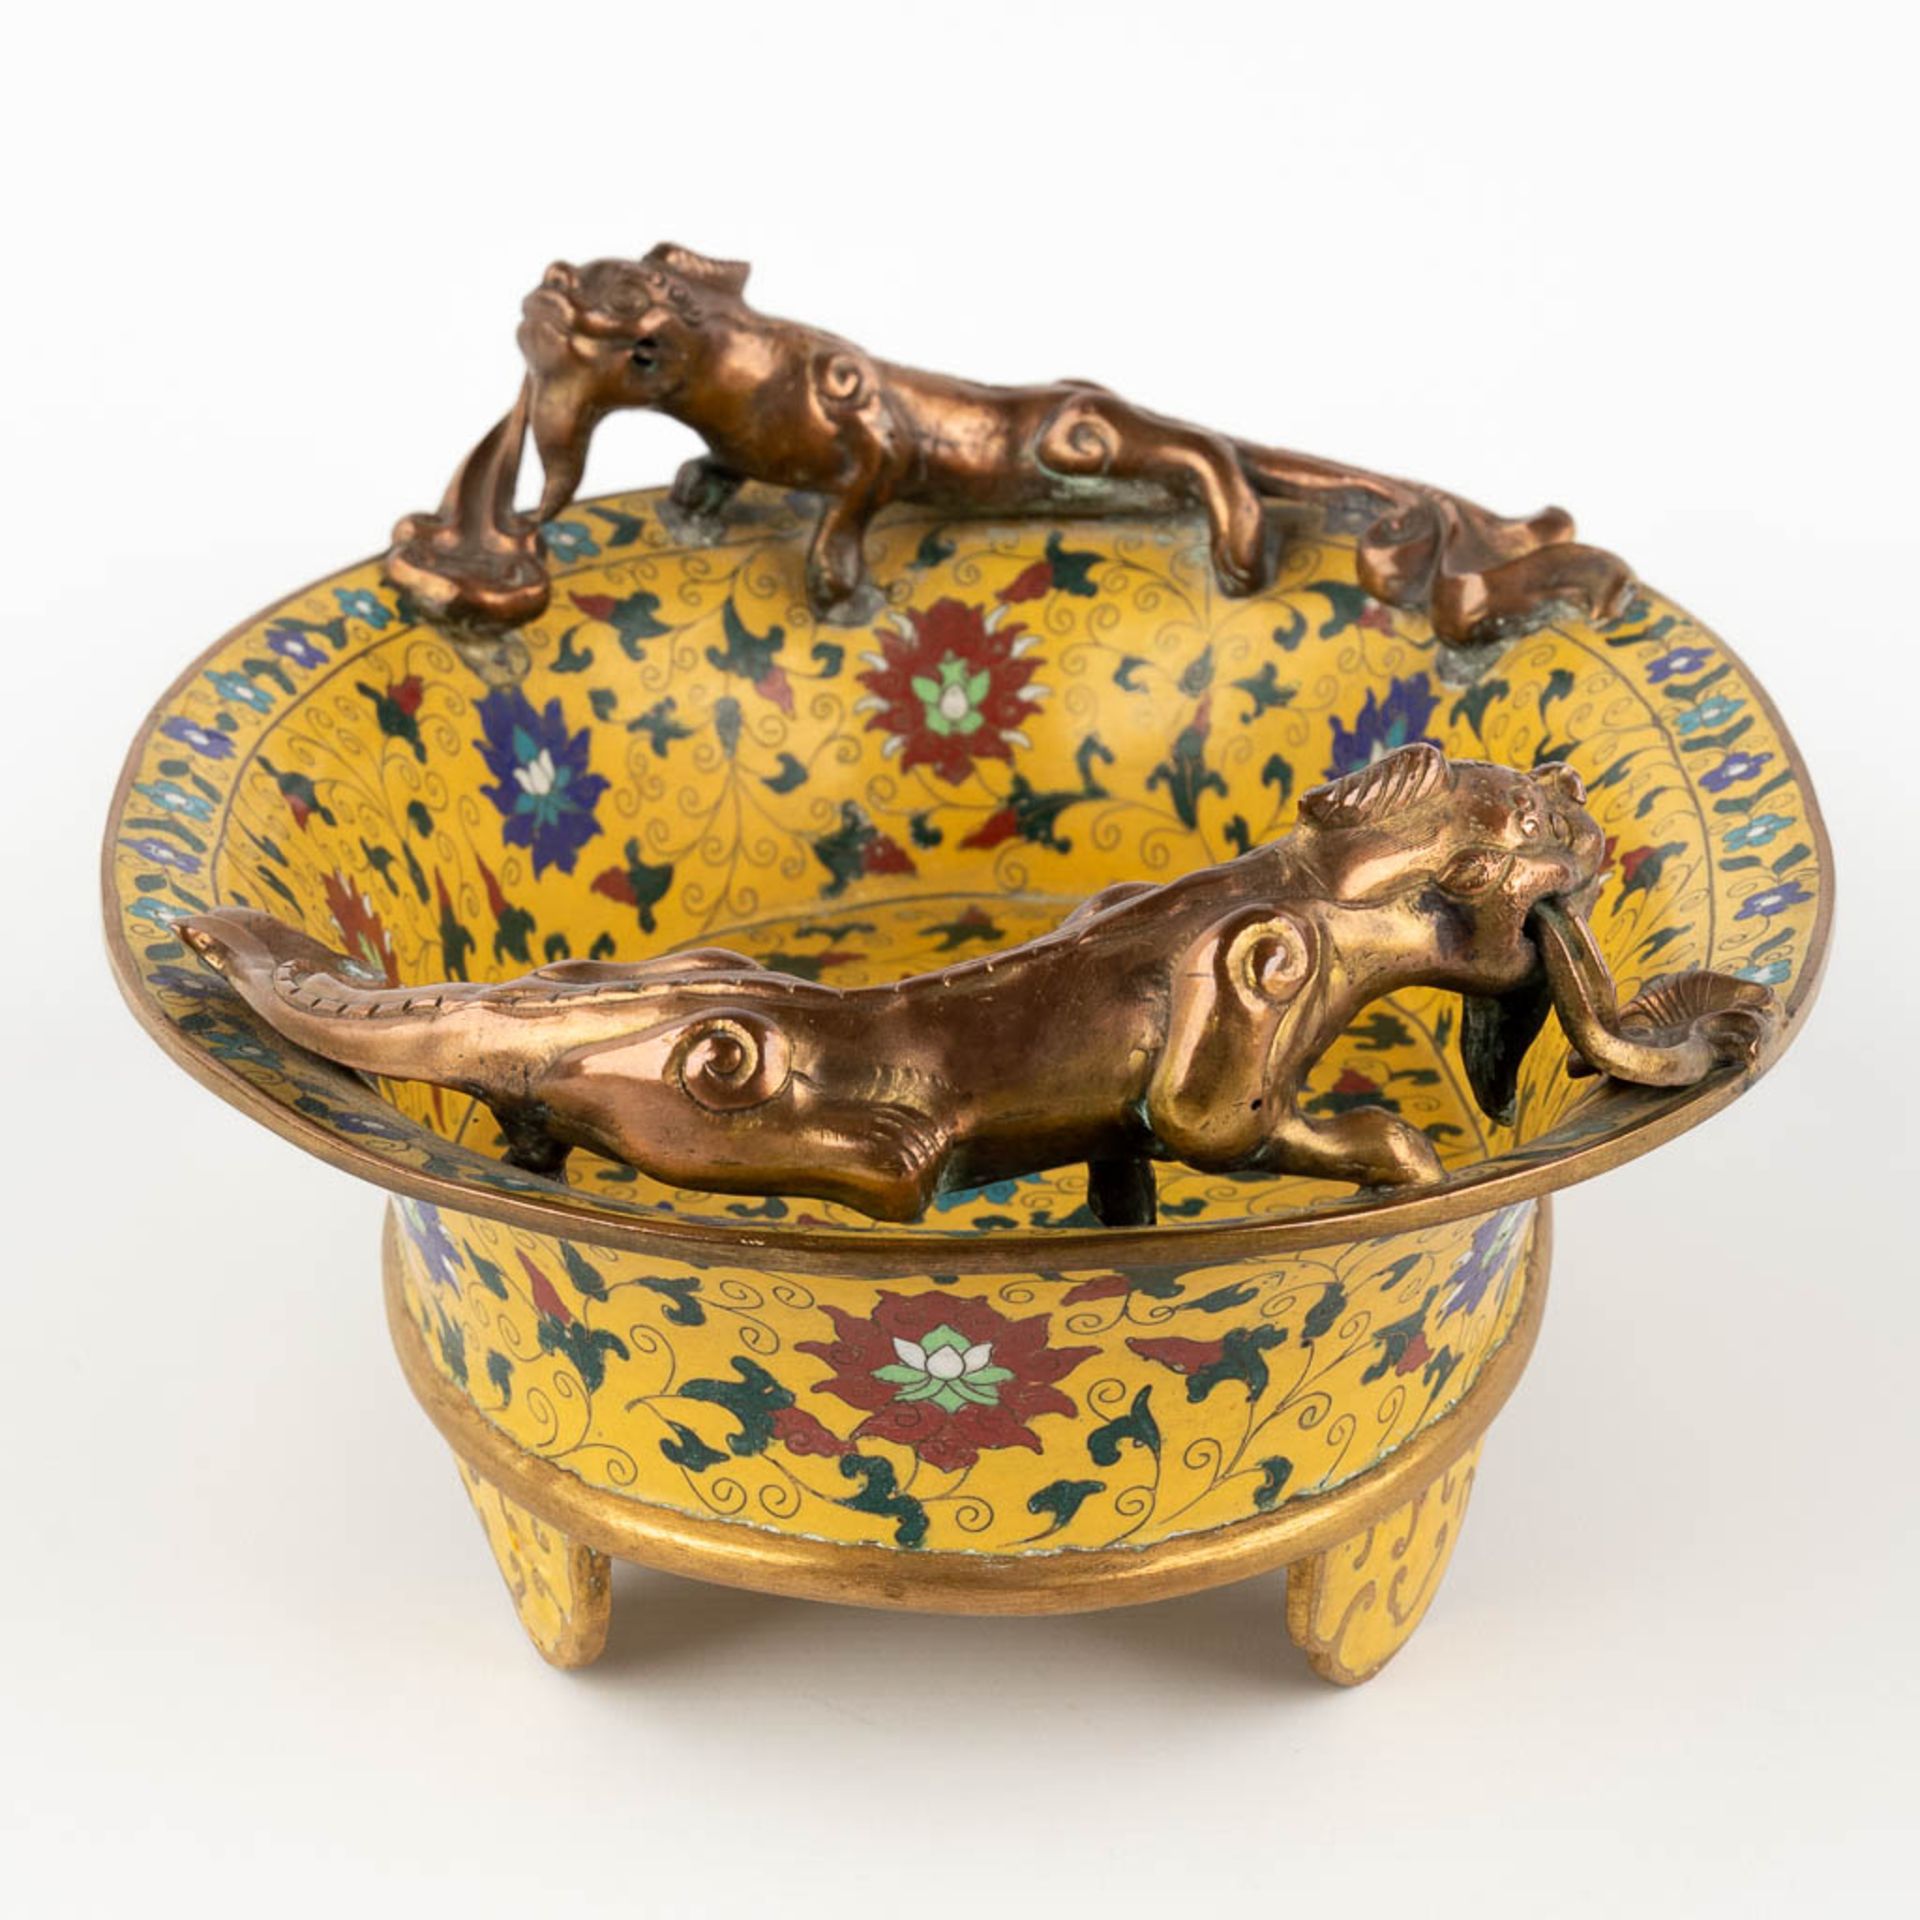 A Chinese cloisonné bronze bowl, mounted with dragons and finished with floral decor. (D:25,5 x W:36 - Image 4 of 13